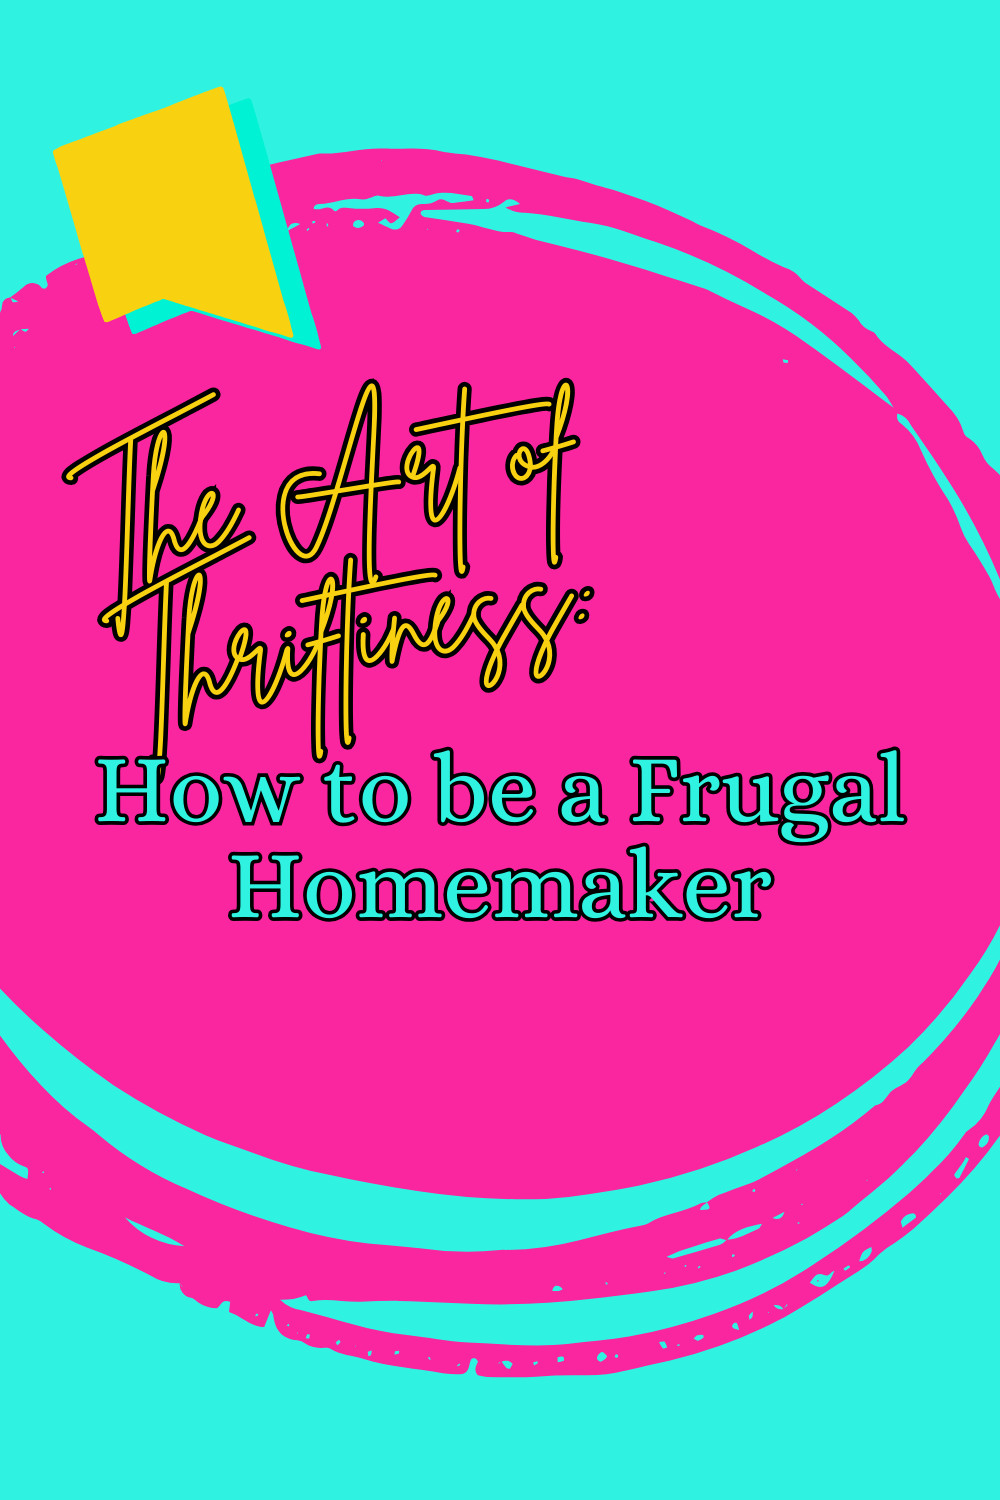 The Art of Thriftiness: How to be a Frugal Homemaker